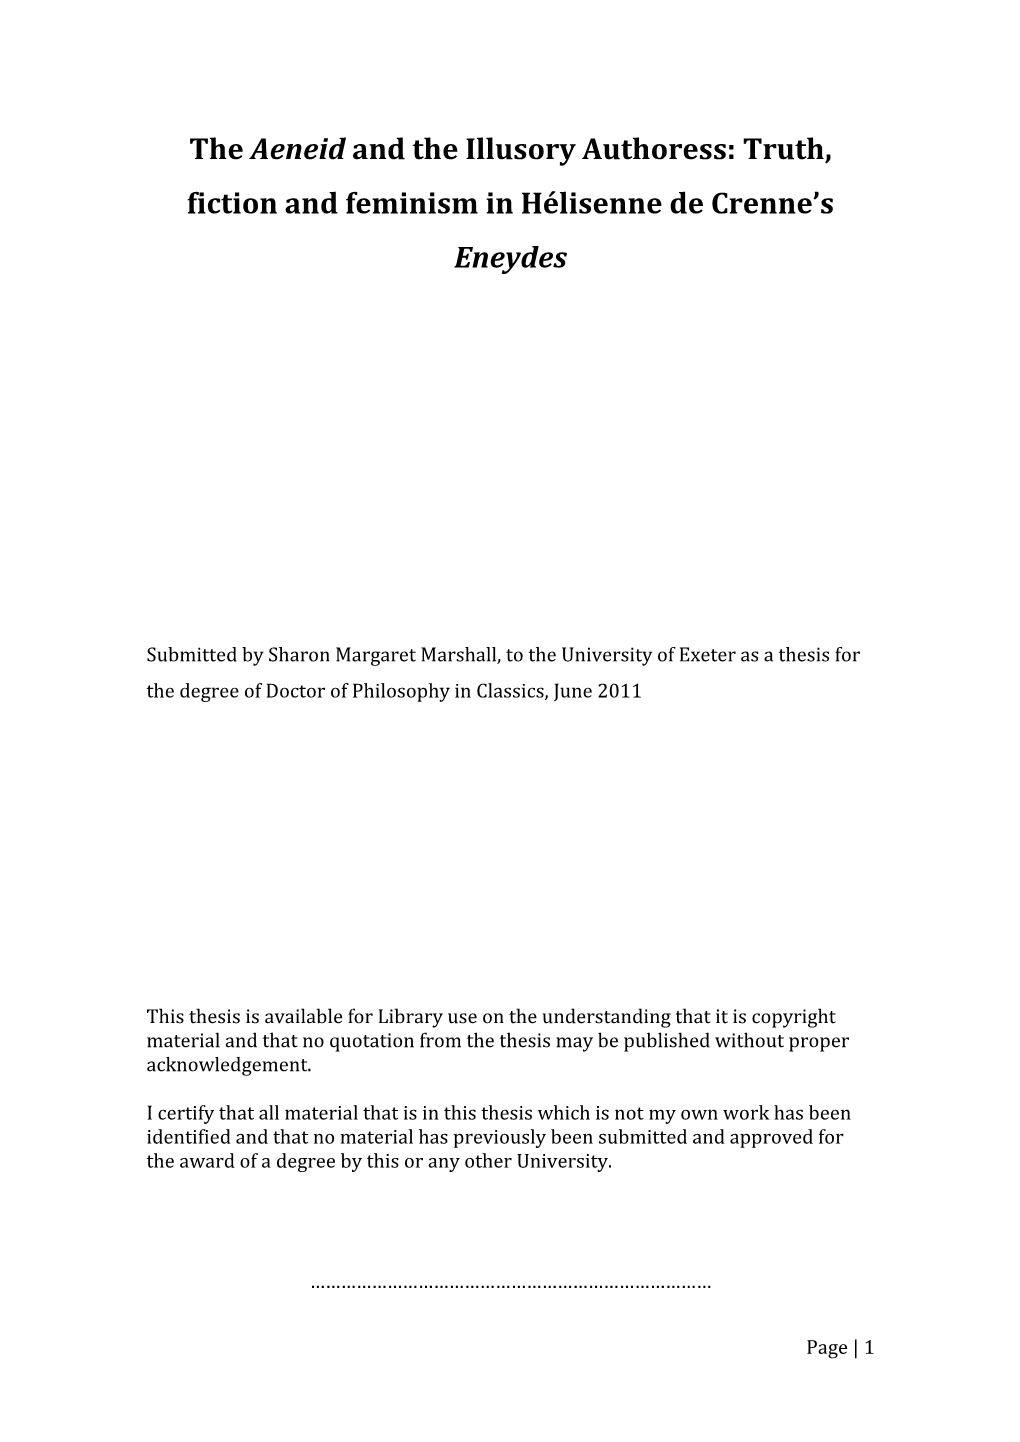 The Aeneid and the Illusory Authoress: Truth, Fiction and Feminism in Hélisenne De Crenne’S Eneydes